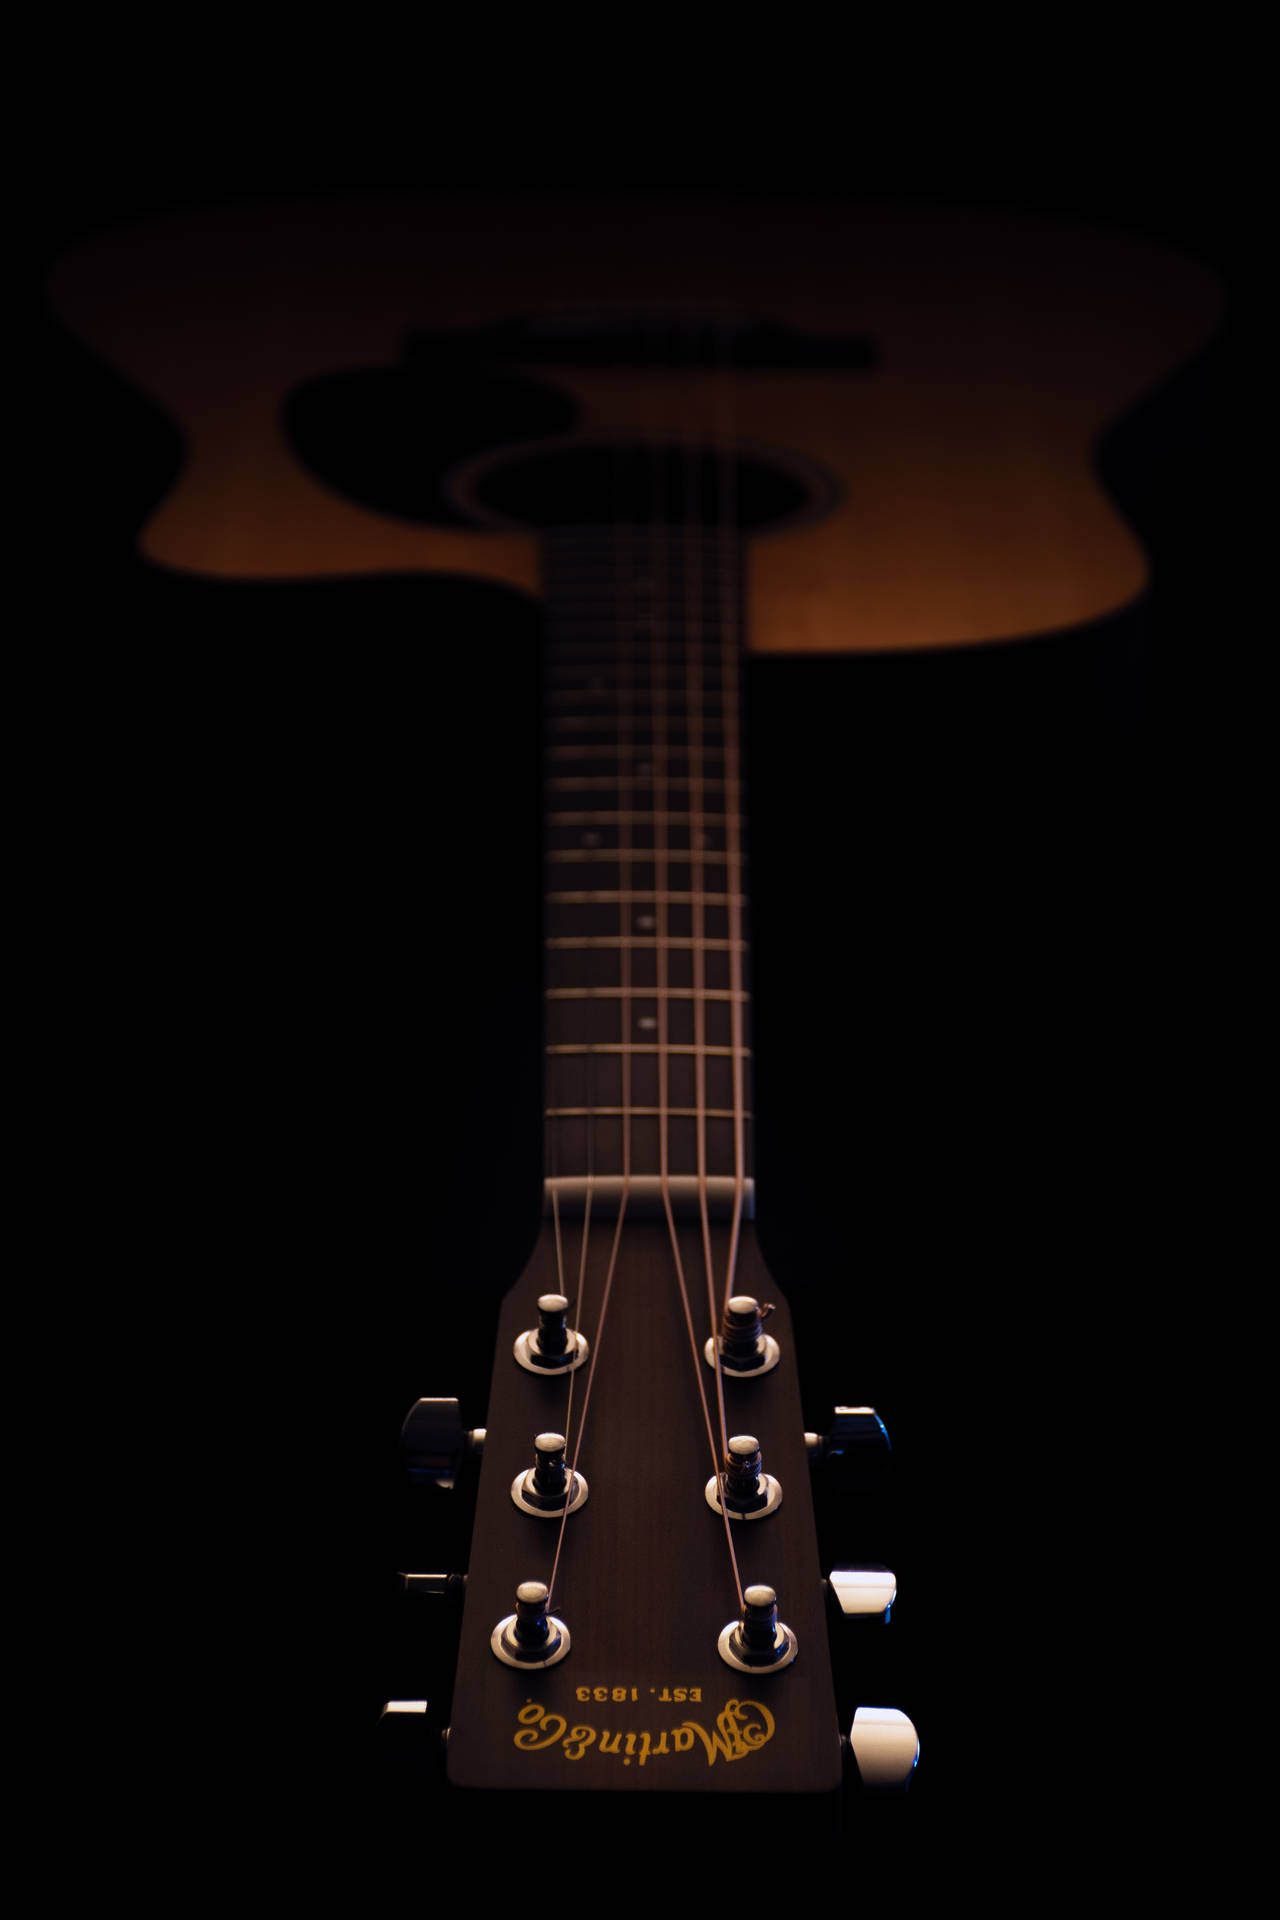 3635X5453 Guitar Wallpaper and Background